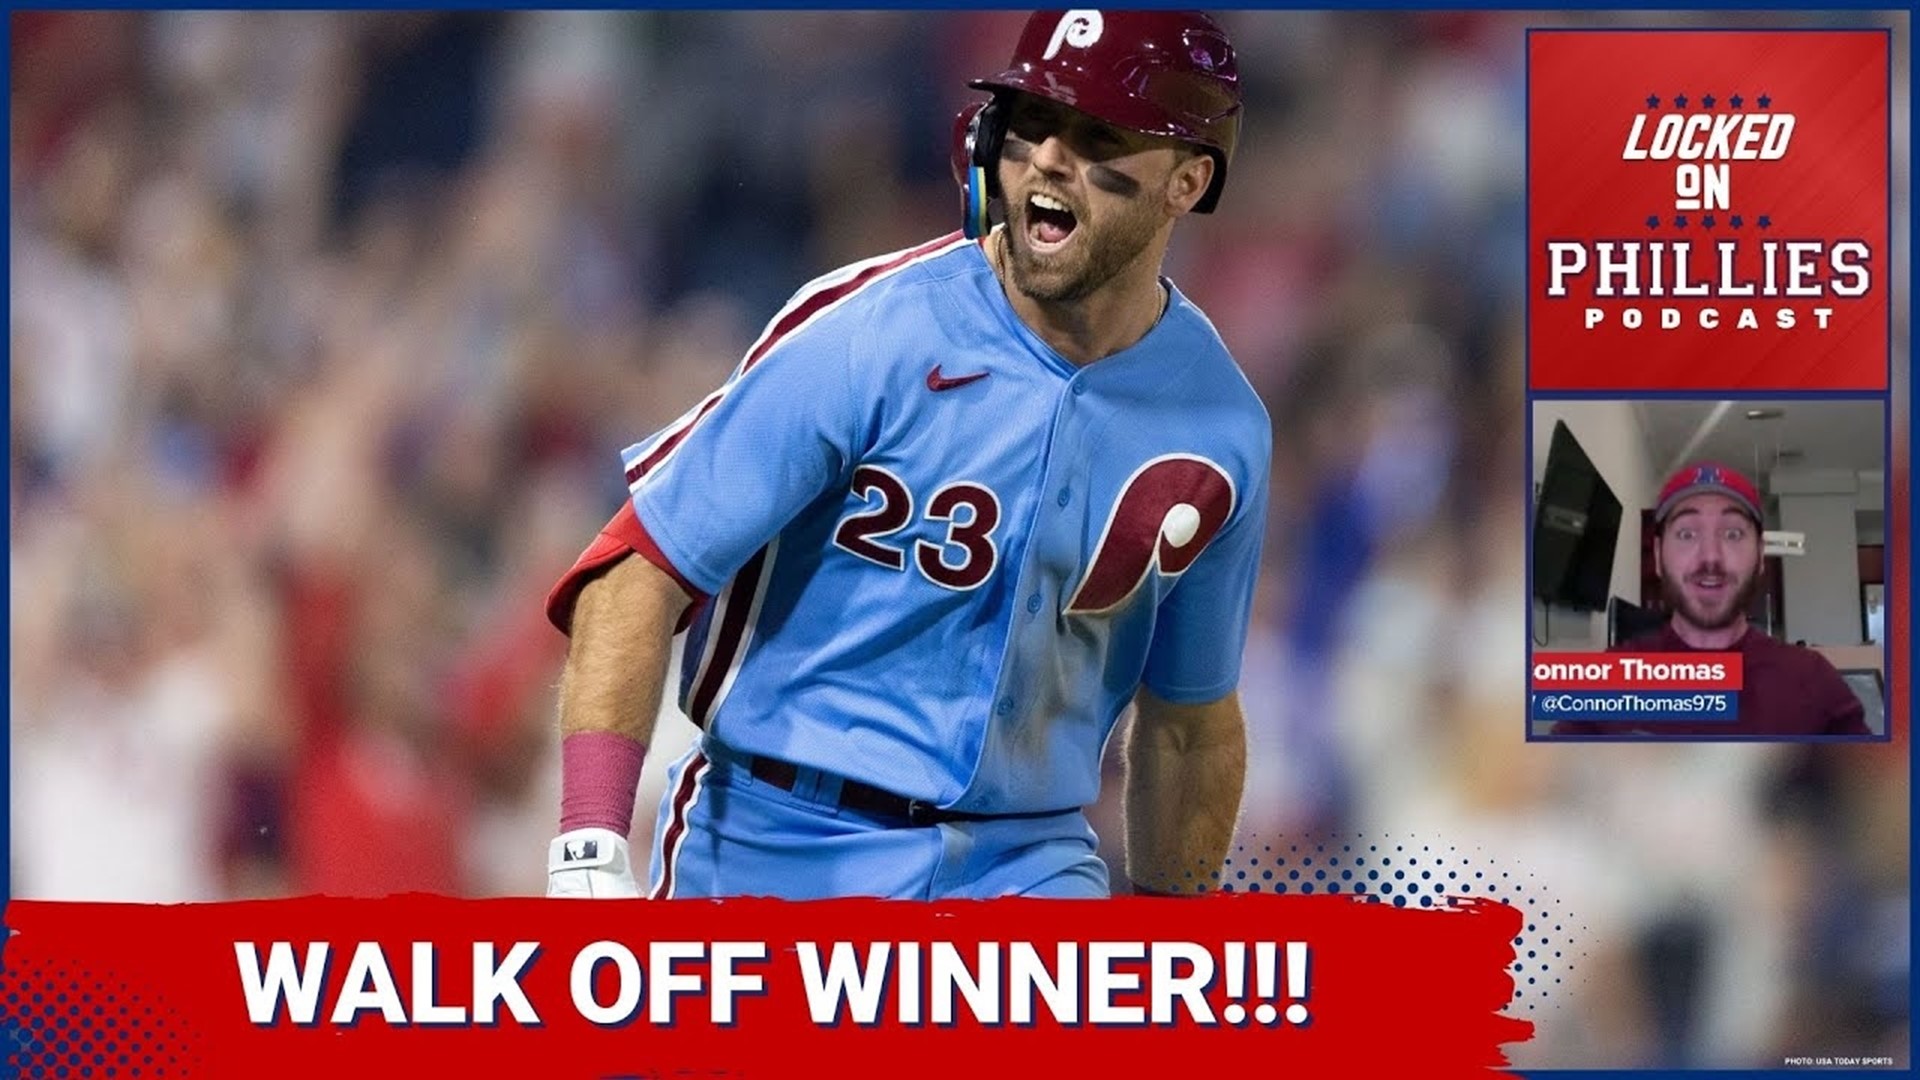 In today's episode, Connor reacts to an exciting 5th straight win for the Philadelphia Phillies.